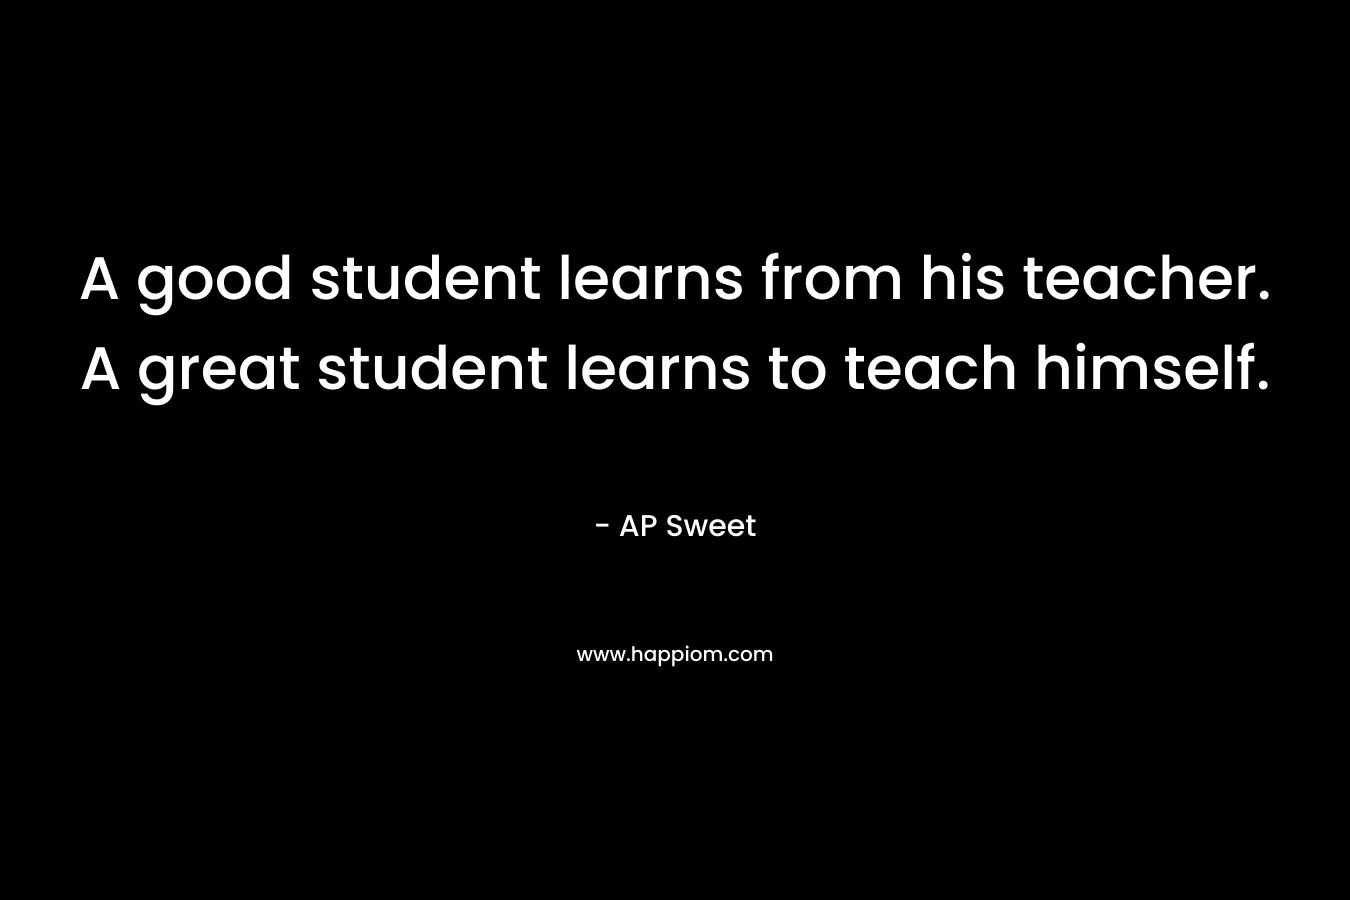 A good student learns from his teacher. A great student learns to teach himself.